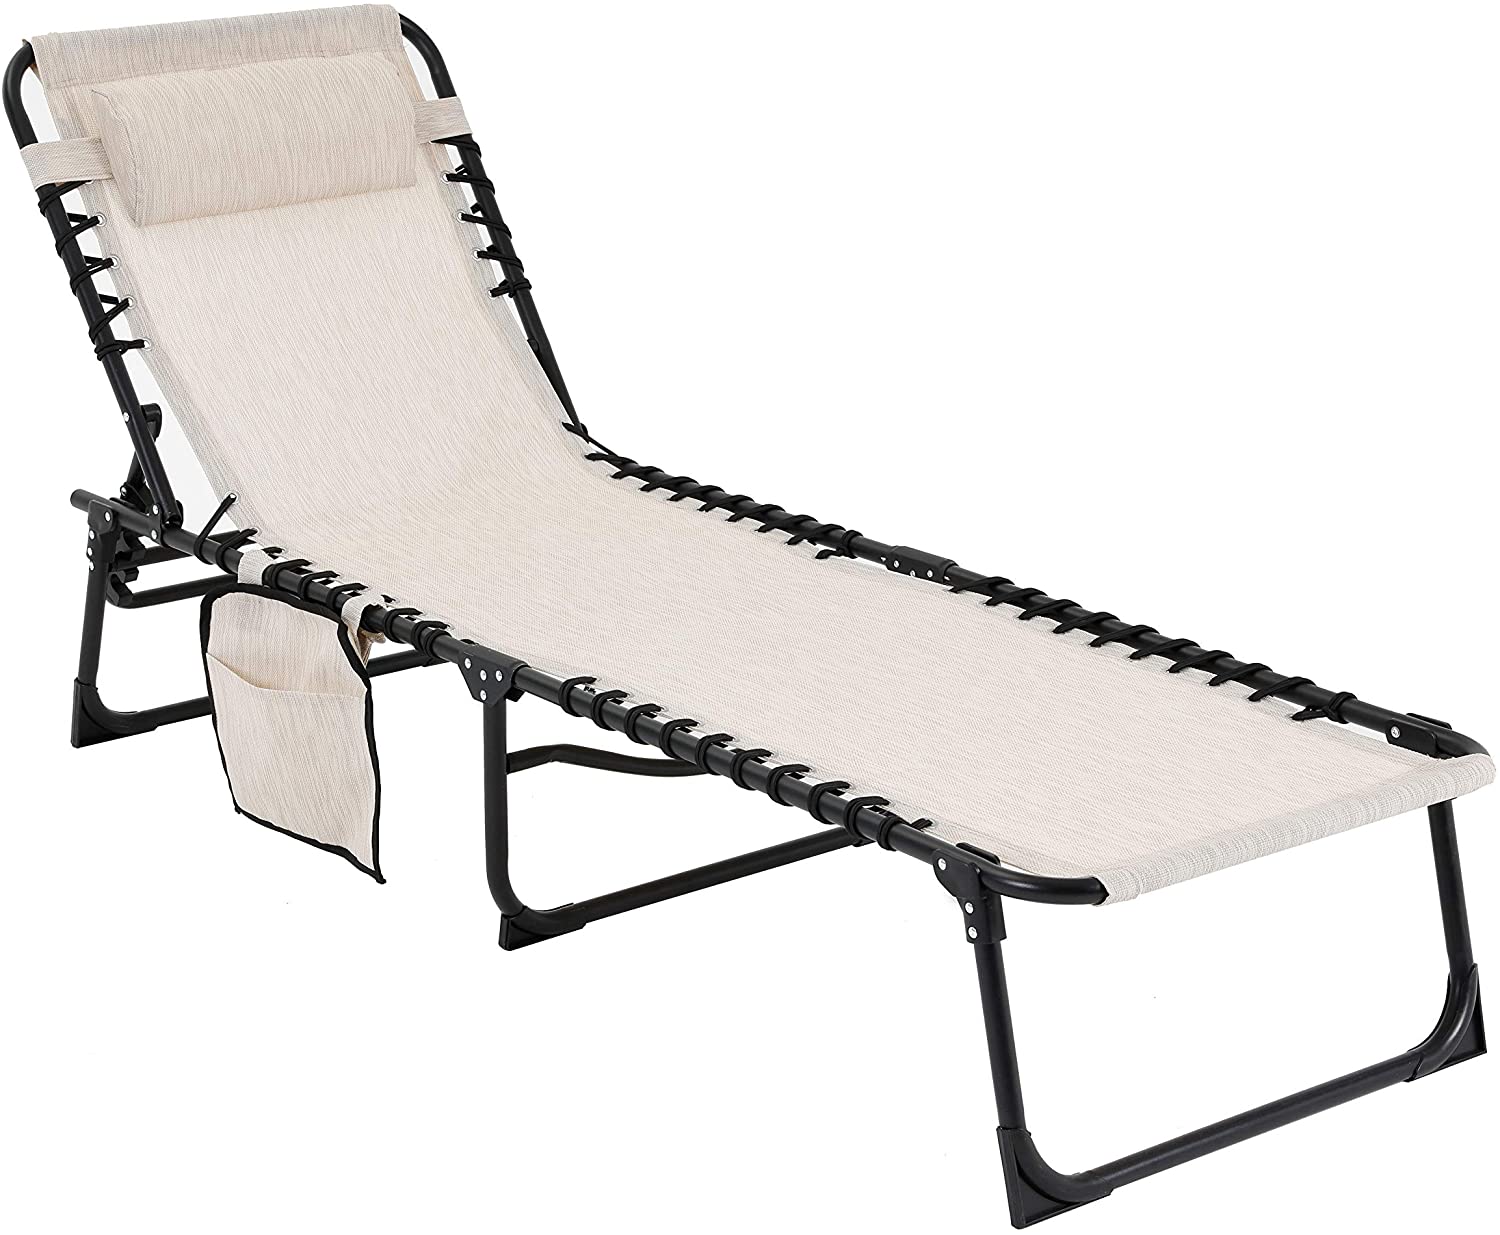 Outdoor Folding Chaise Lounge Chair Lightweight Recliner w/Cushion Black